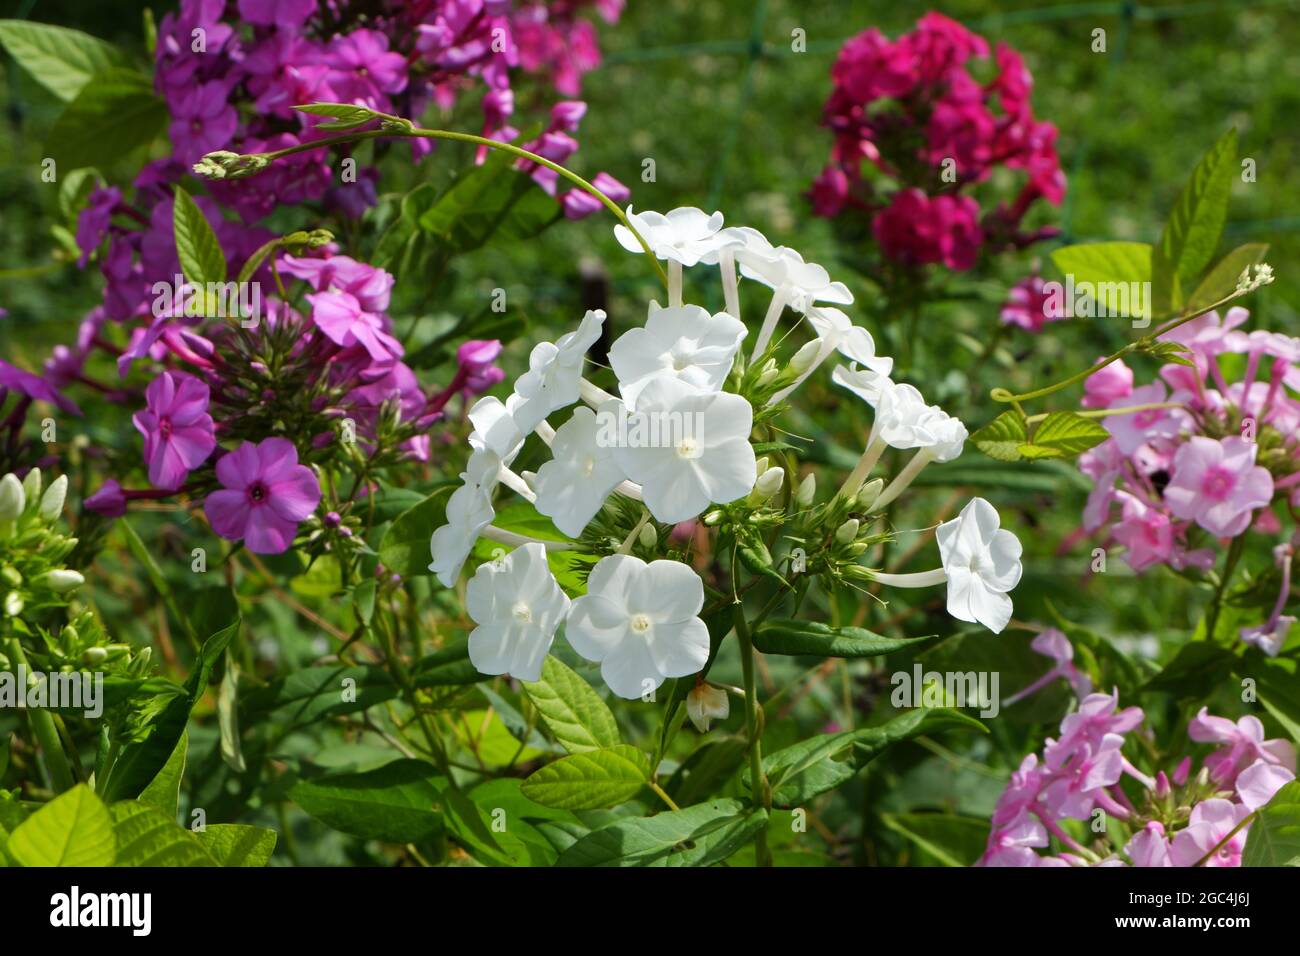 Phlox paniculata. Gorgeous bright white flower buds on a background of green grass. Selective focus. Stock Photo